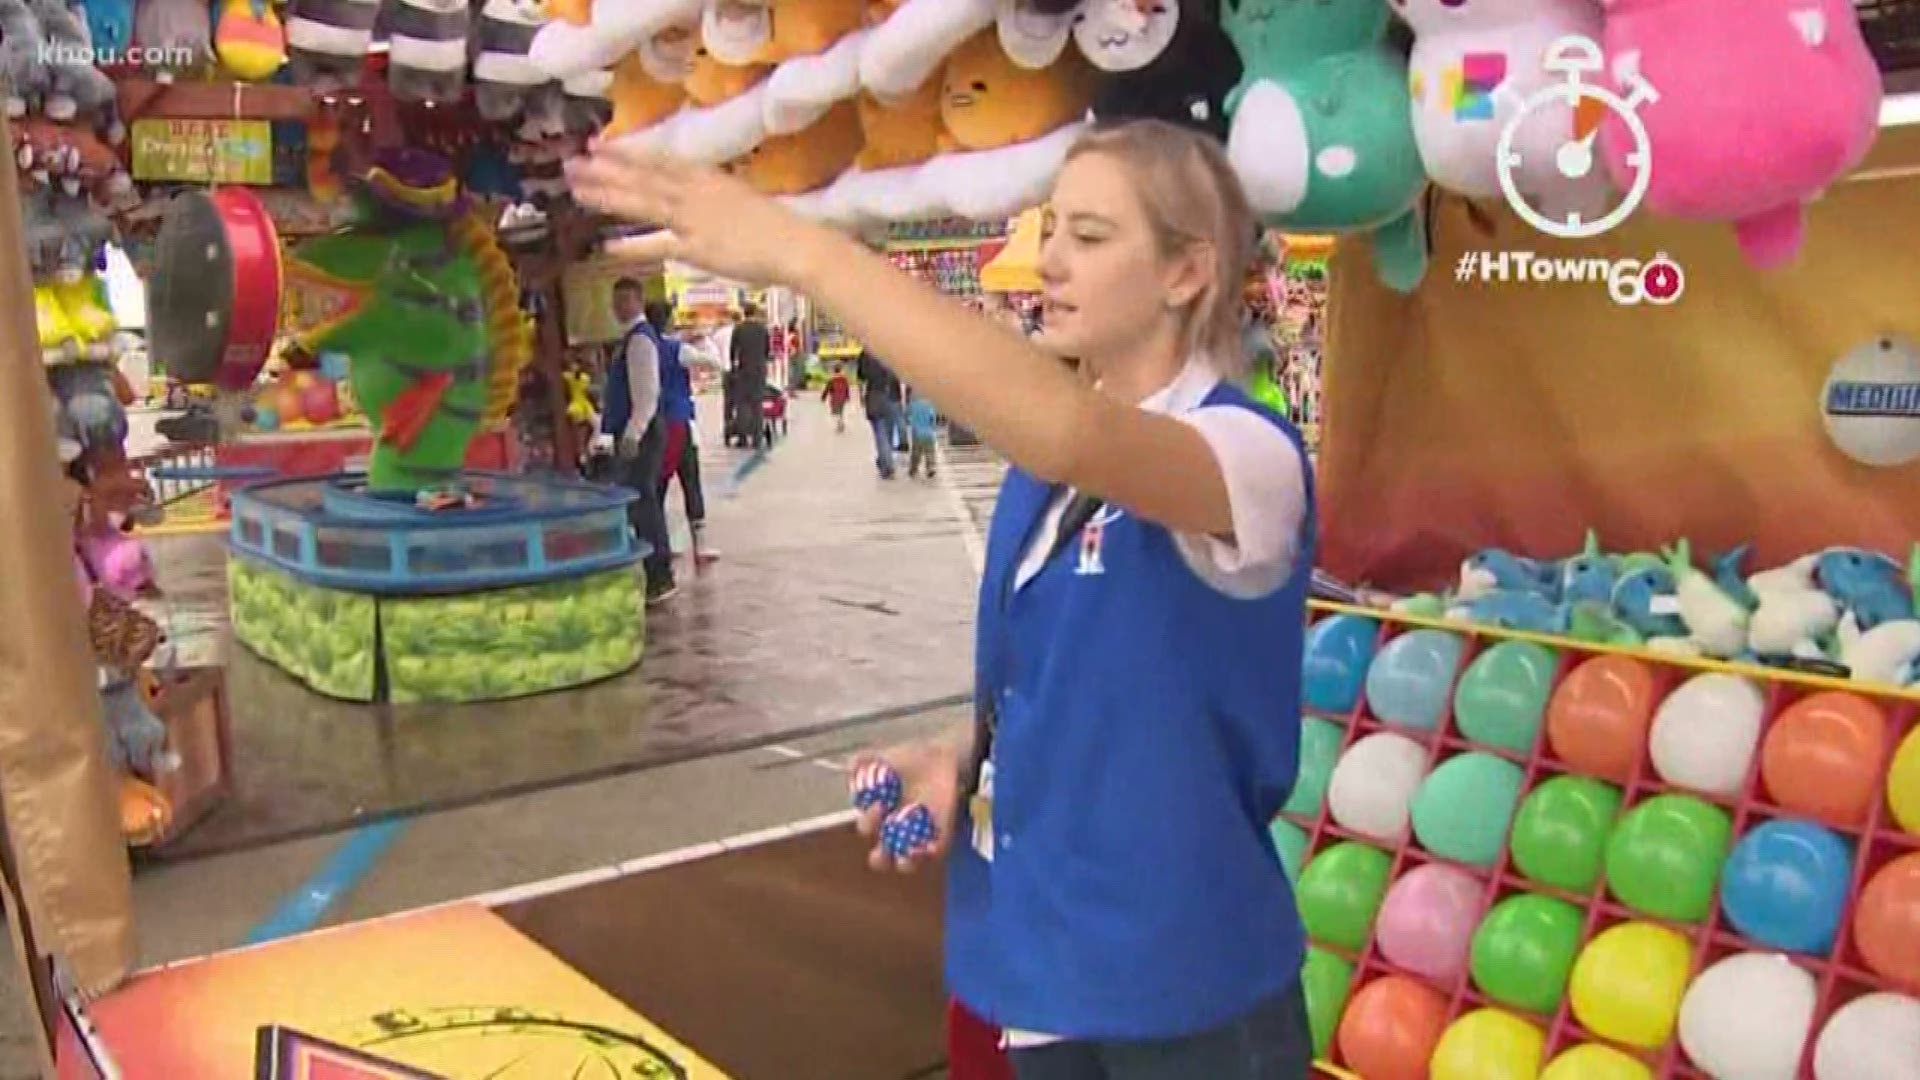 Before you head into the show you might want to take stop through the carnival! Our Michelle Choi shows us all the games and the prizes in this morning's HTown60!